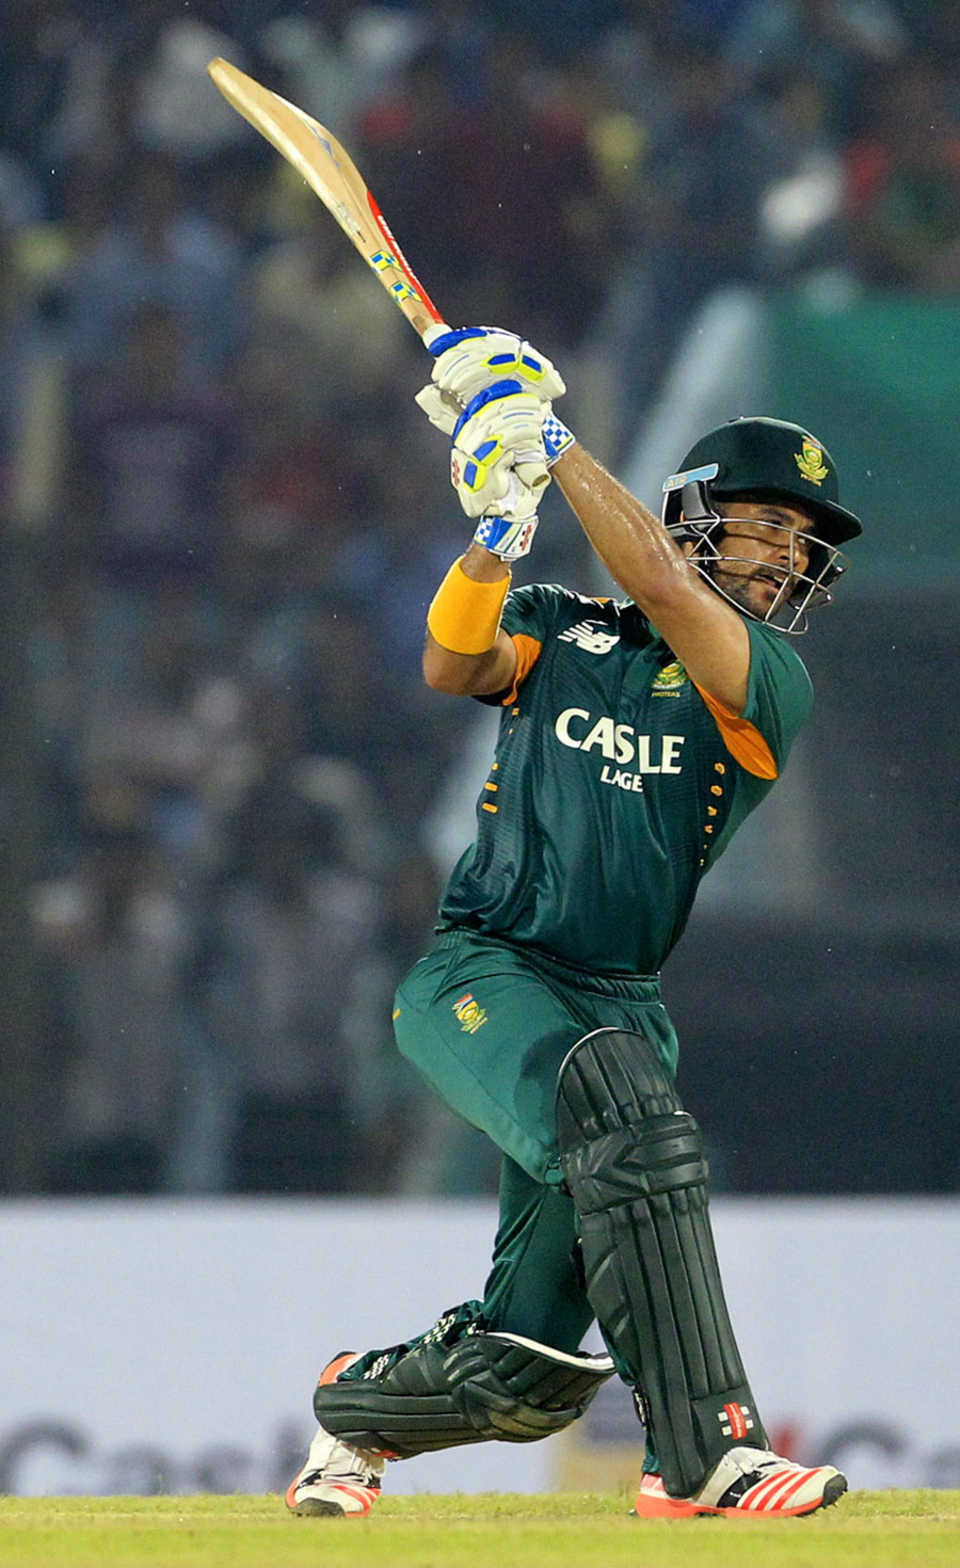 JP Duminy top-scored with 51